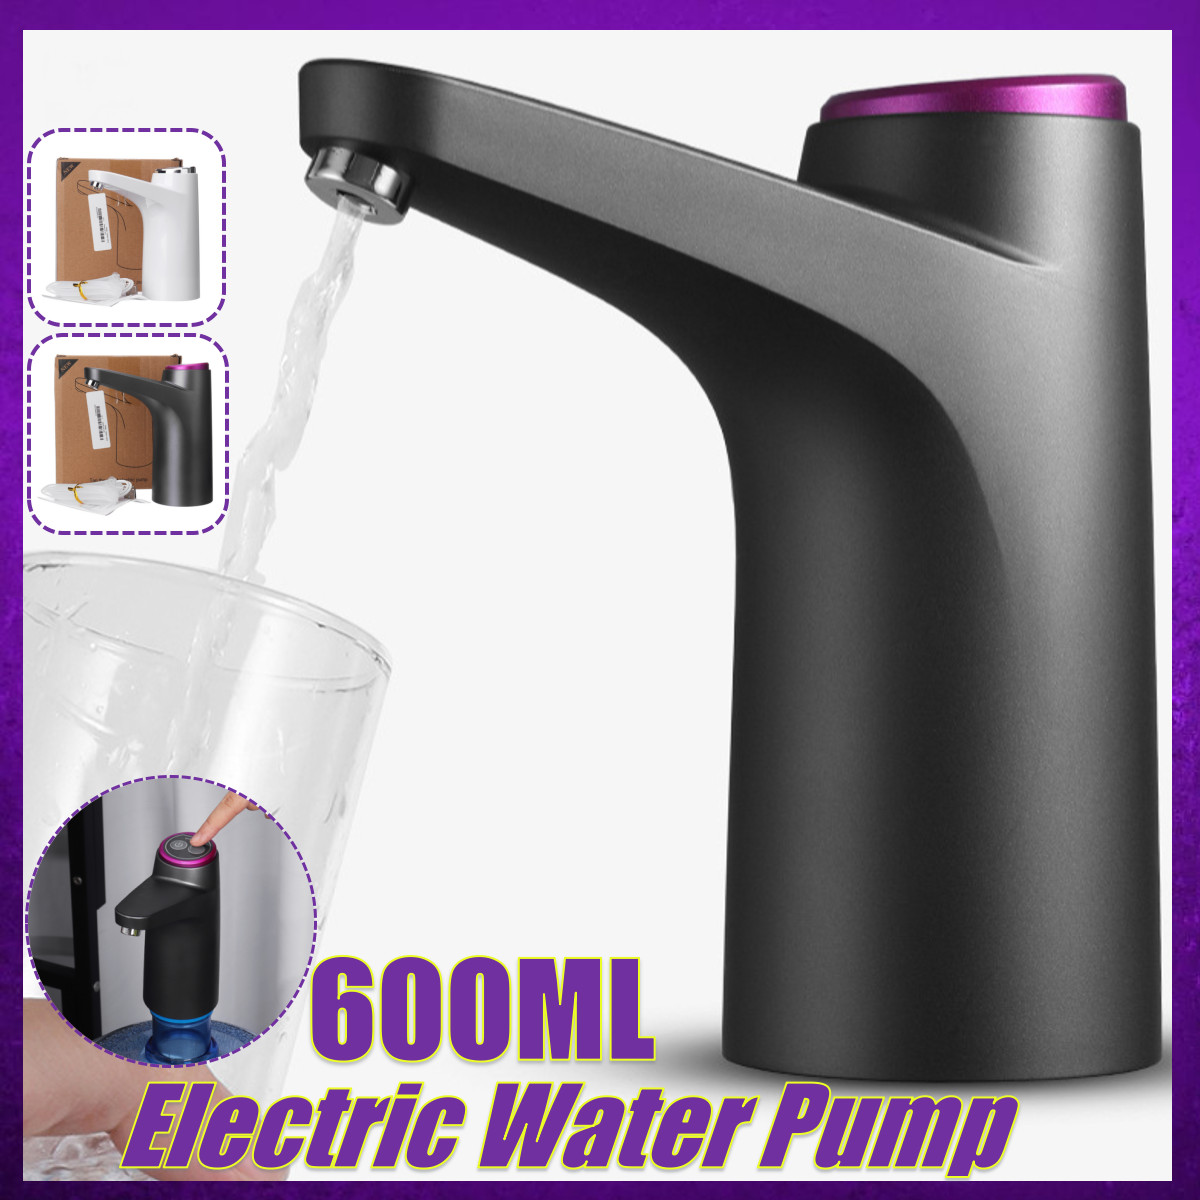 Portable-USB-Wireless-Electric-Water-Pump-Drinking-Bottle-Dispenser-Touch-Control-1670497-2